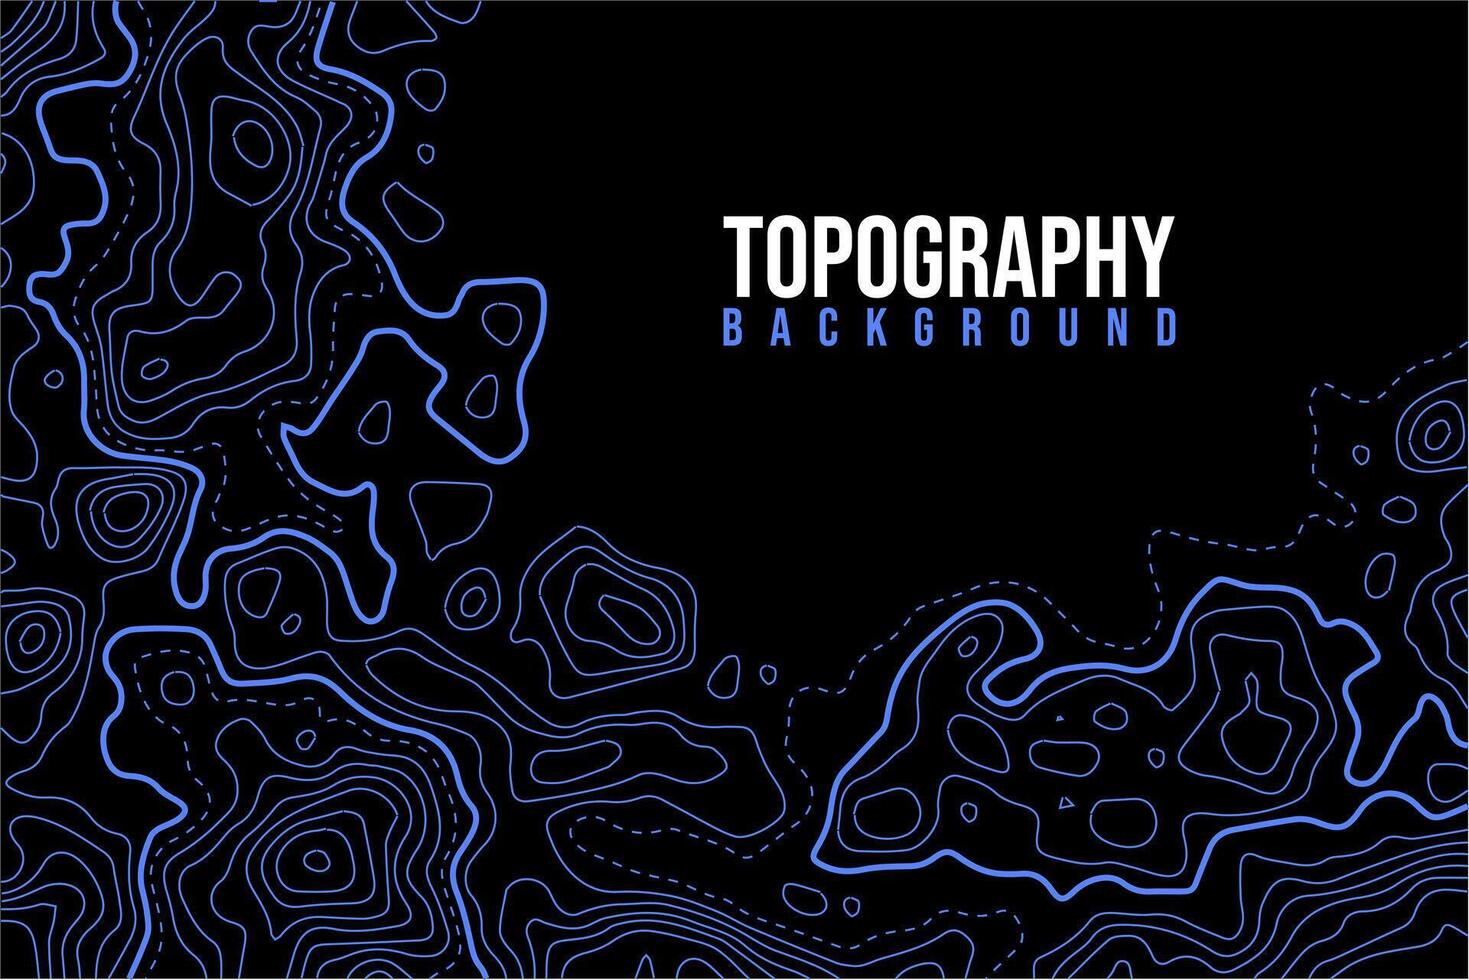 Topographic map abstract background vector